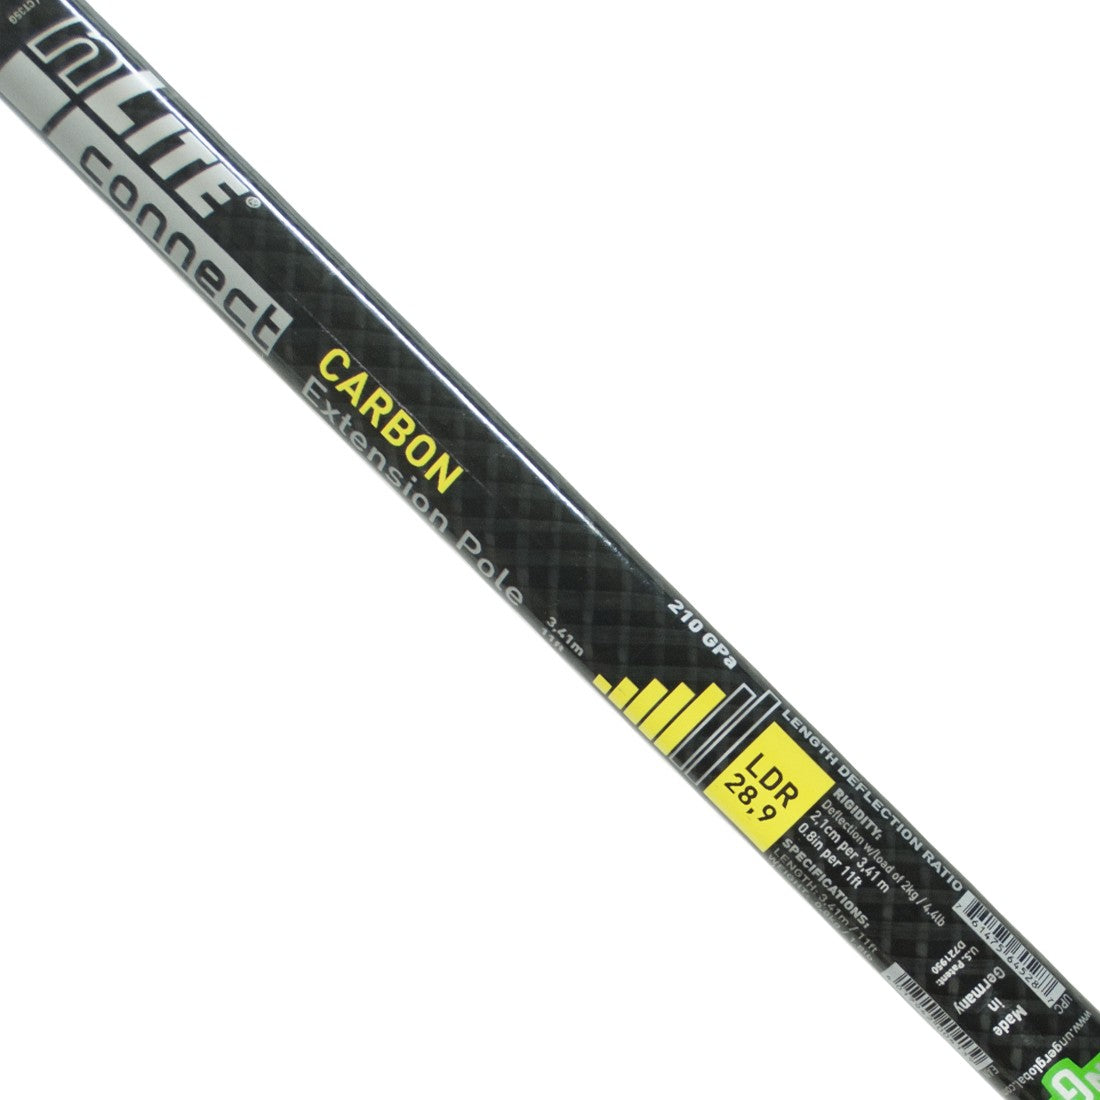 Unger nLite Carbon Extension Pole - 11 Foot - Decal Close-Up View